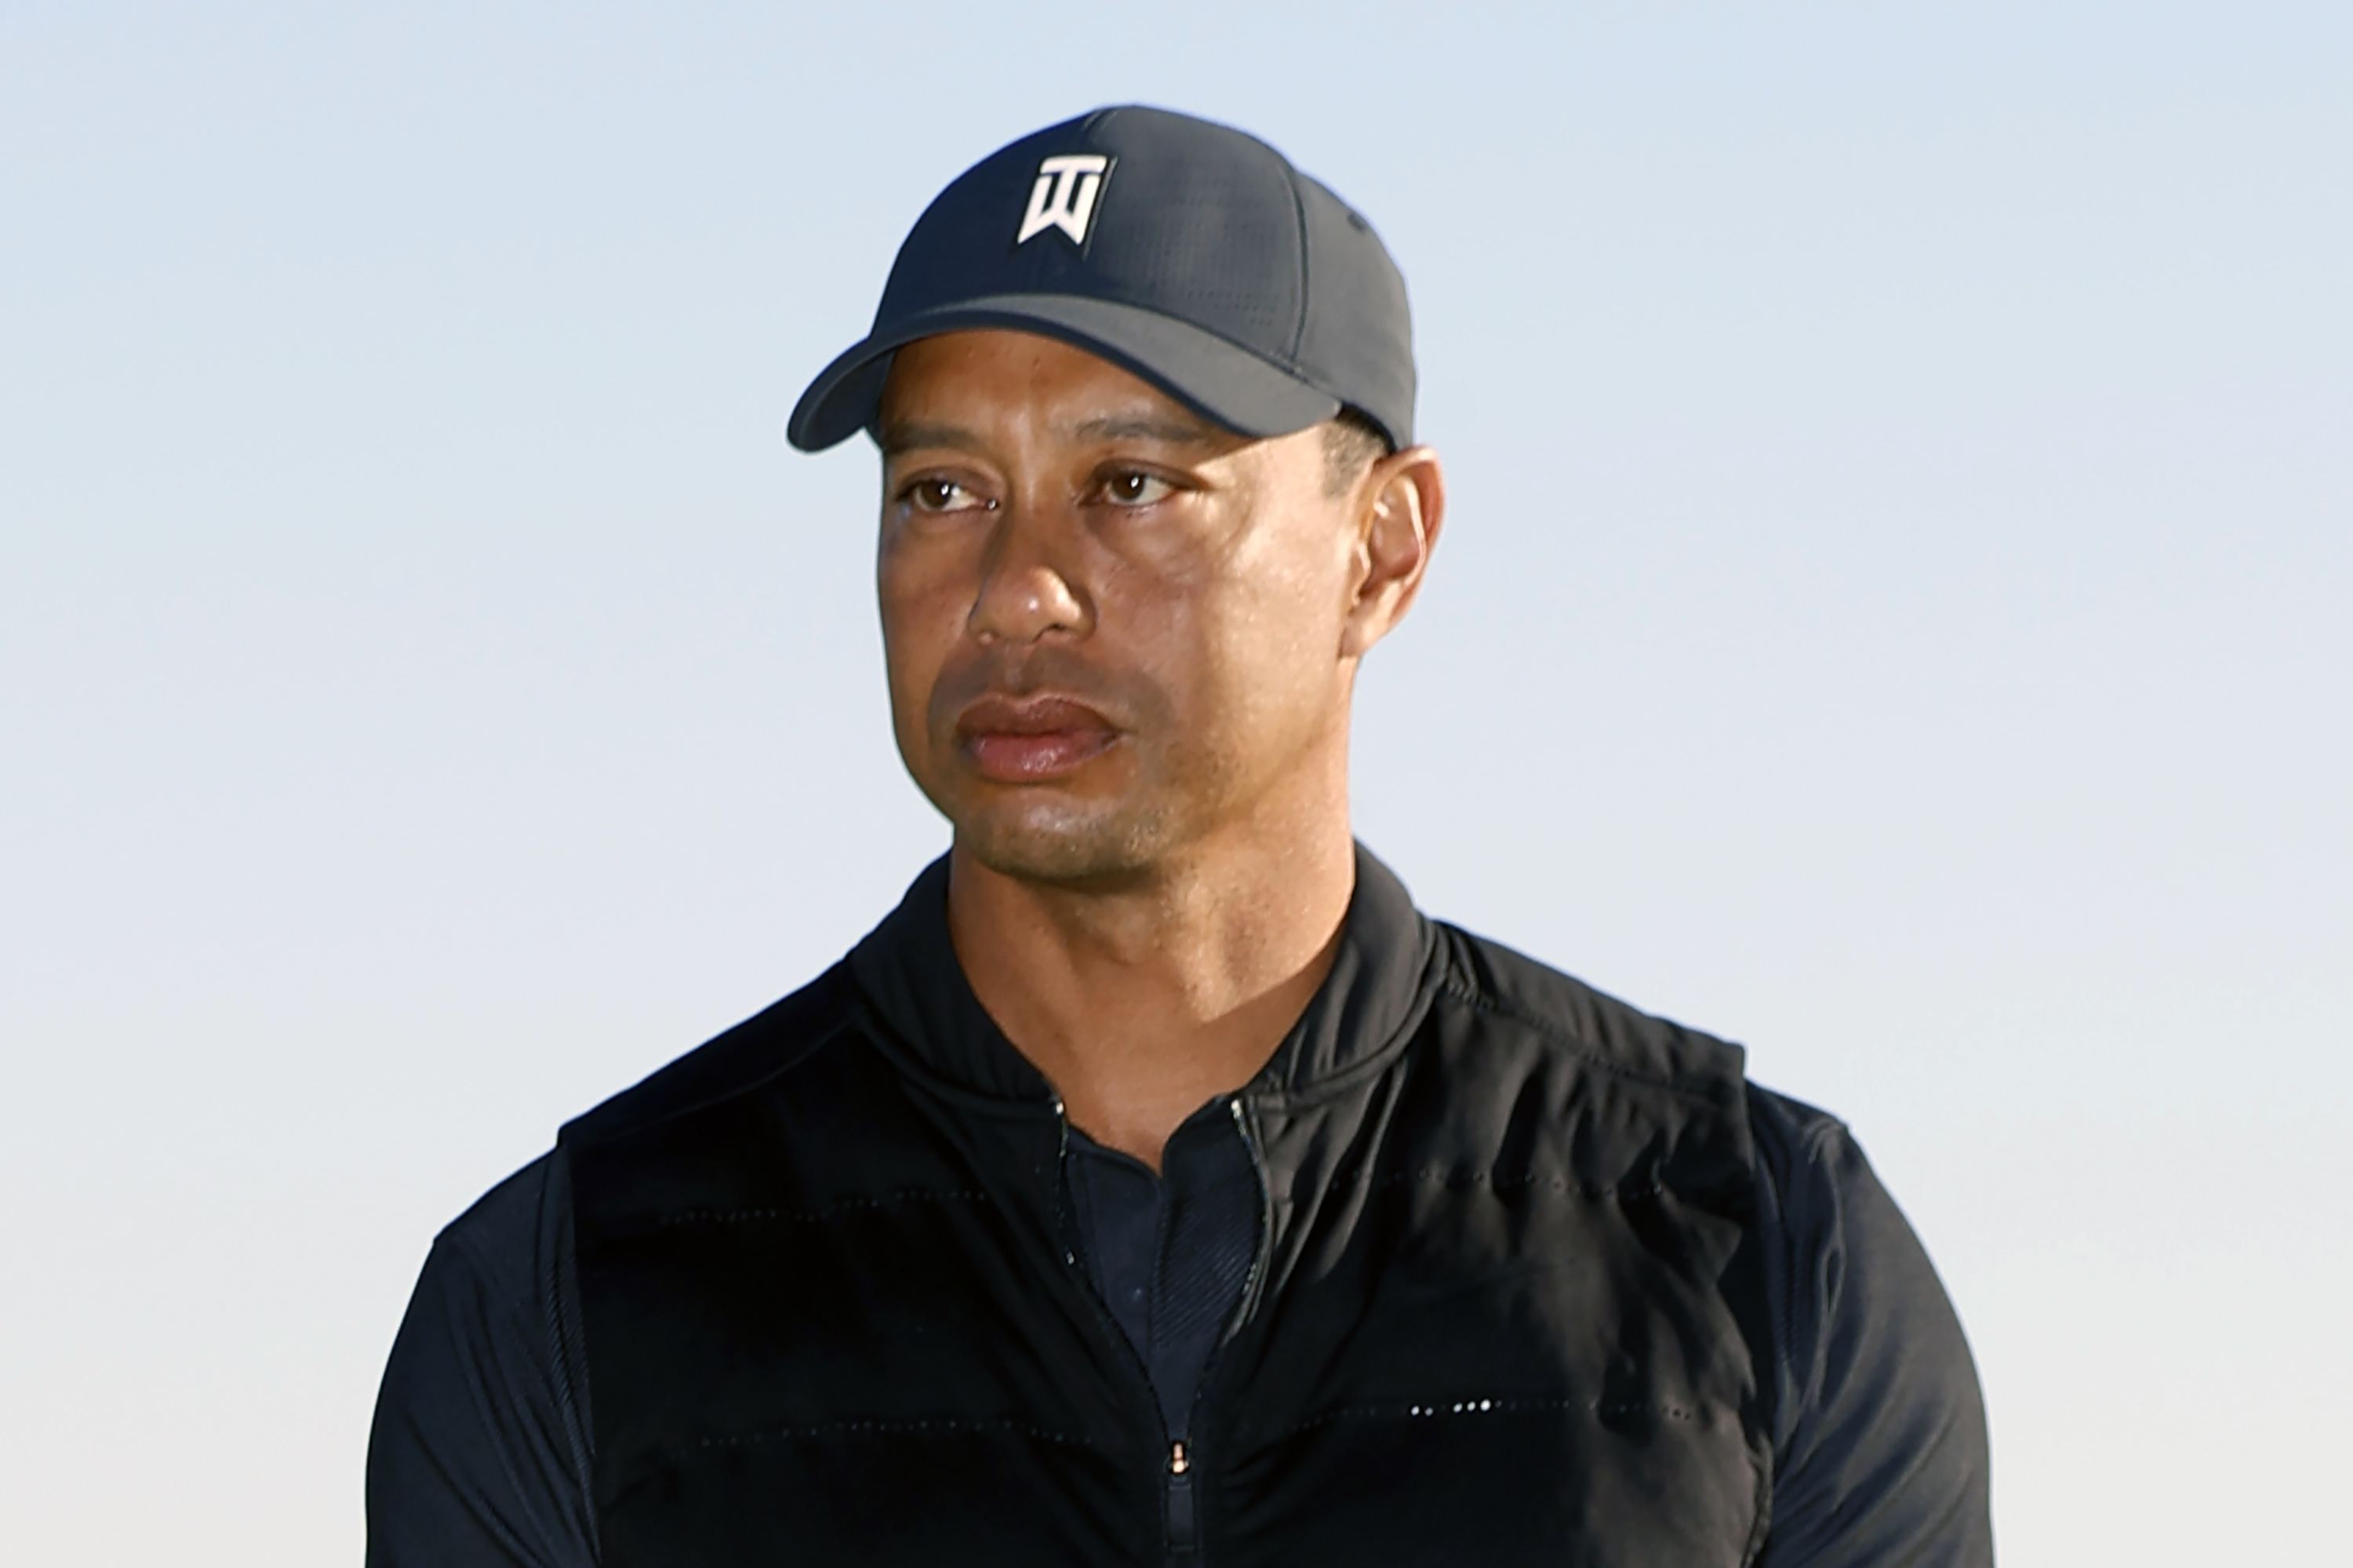 Tiger Woods looks on during the trophy ceremony after the final round of the Genesis Invitational golf tournament on February 21, 2021 in Pacific Palisades, California, the United States [File: Ryan Kang/AP Photo]